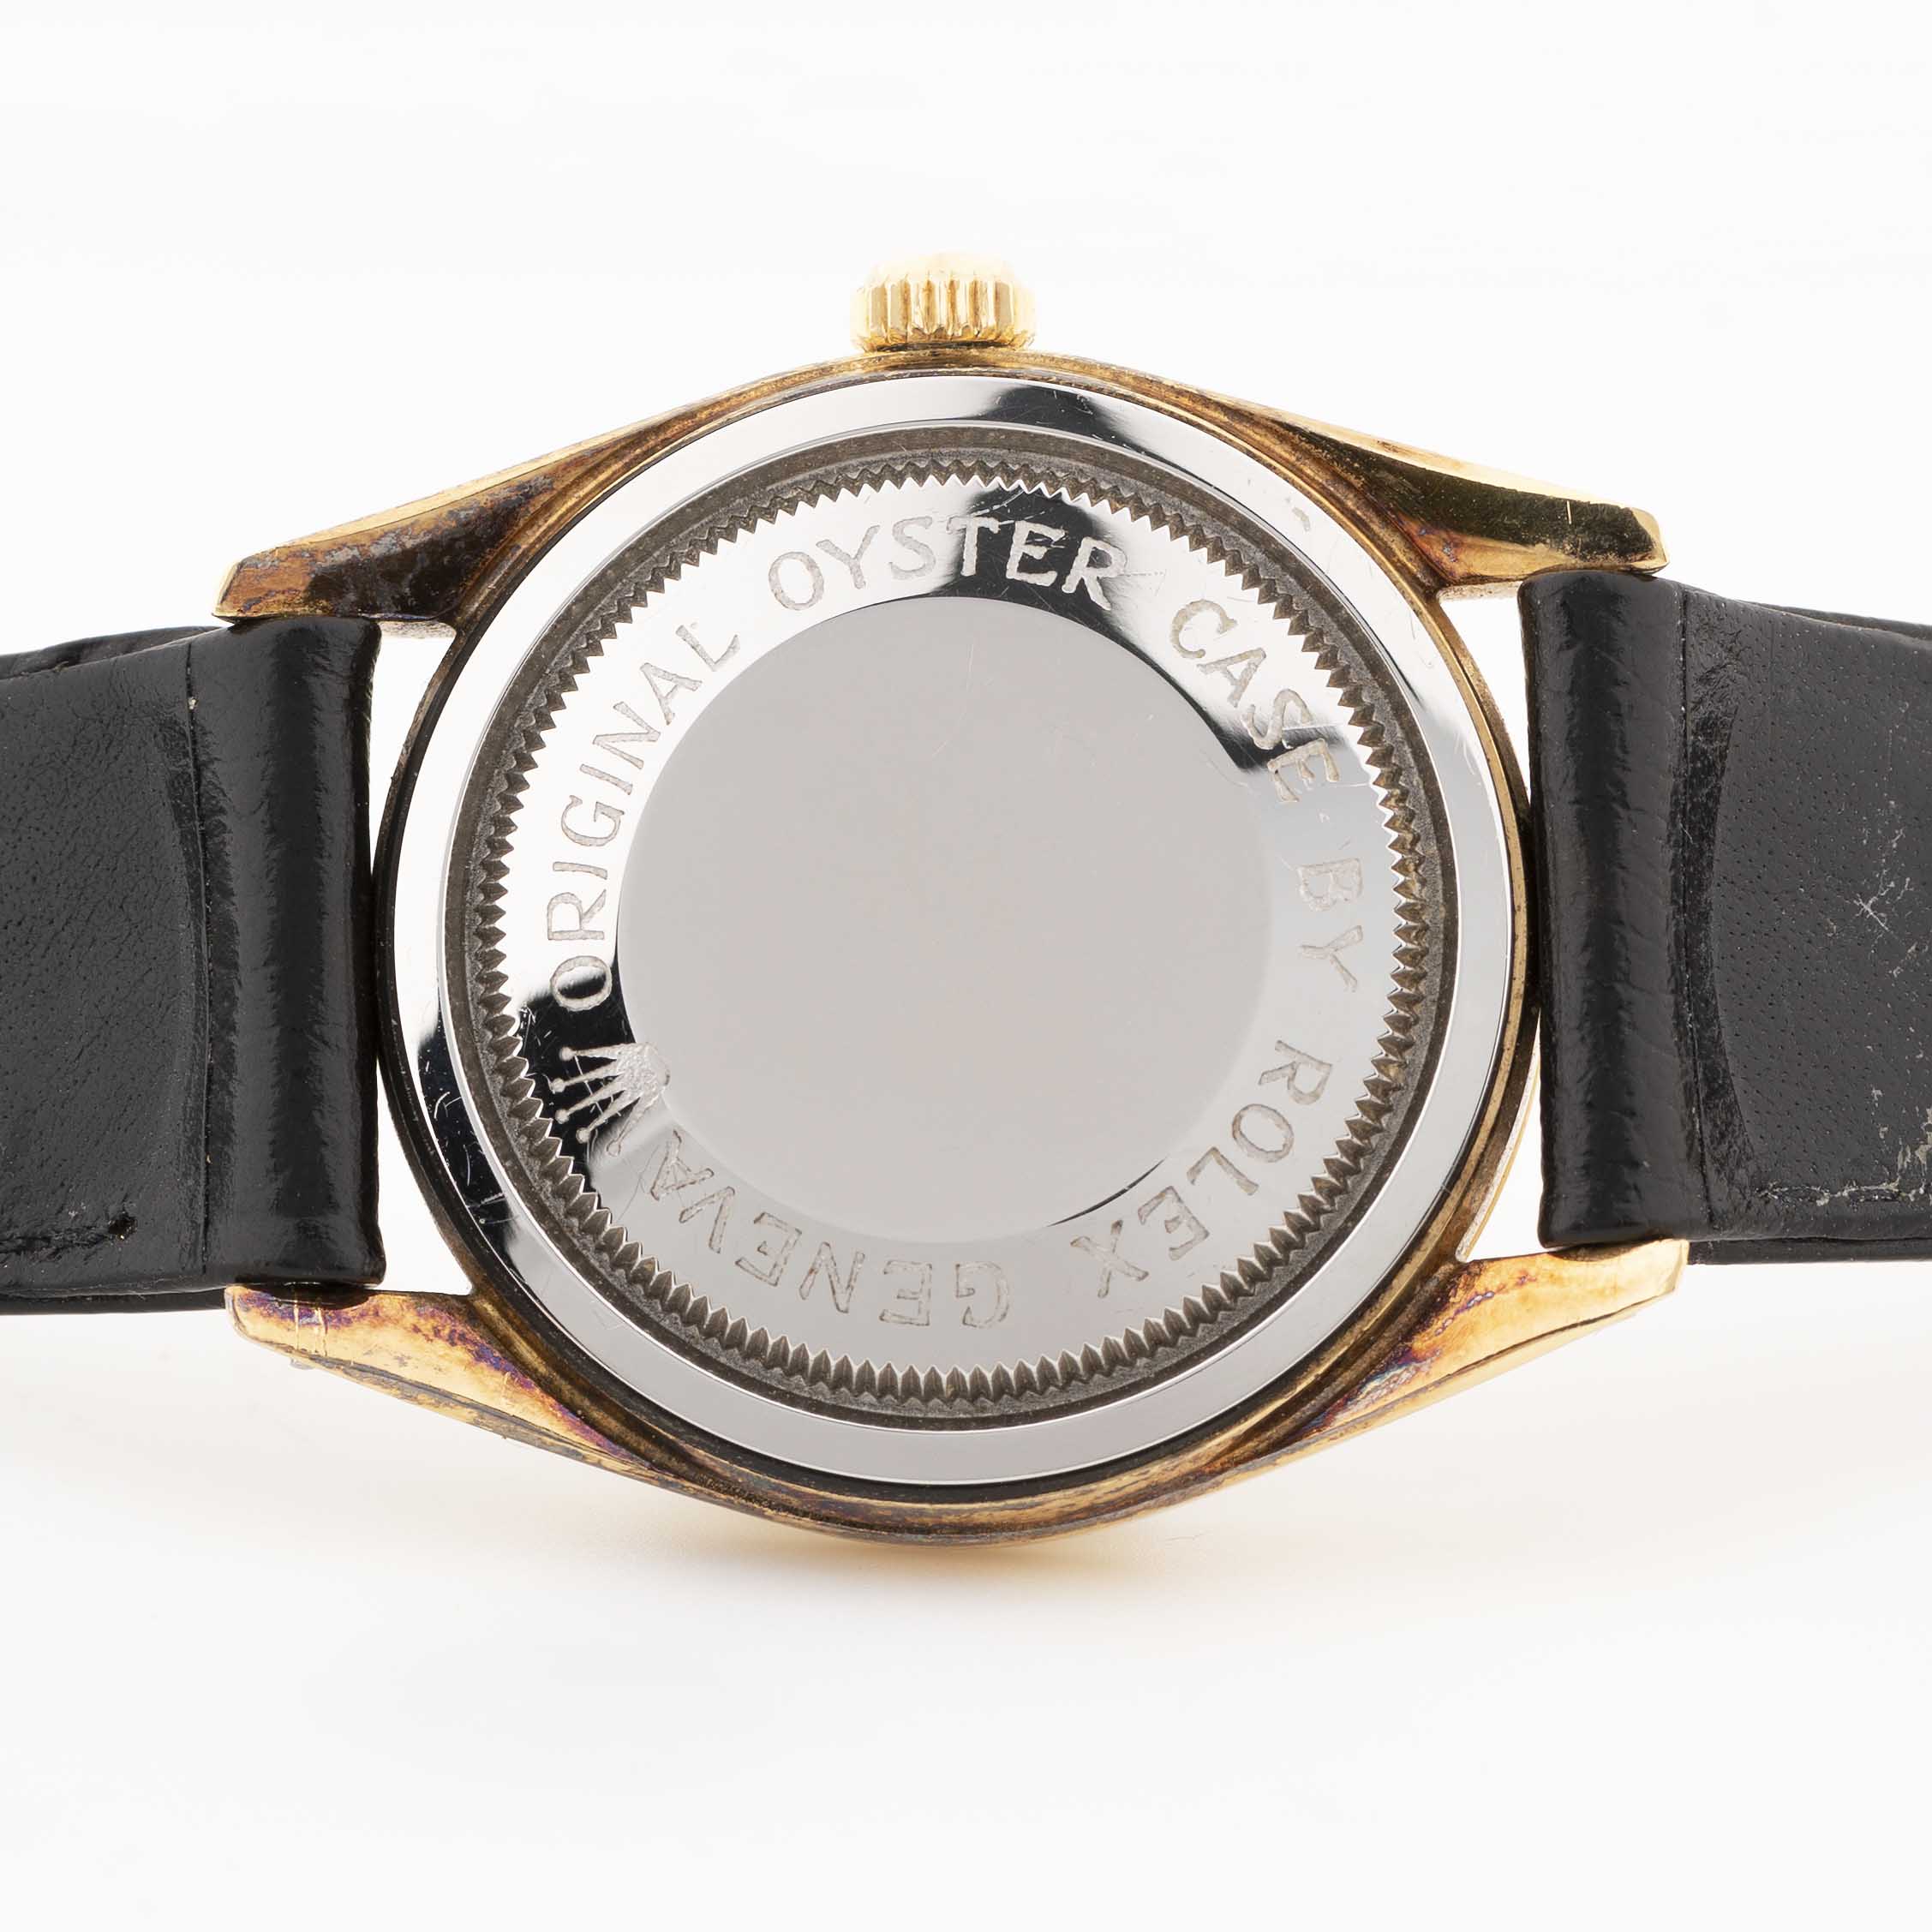 A GENTLEMAN'S GOLD PLATED TUDOR OYSTER PRINCE SELF WINDING WRIST WATCH DATED 1970, REF. 7965 WITH - Image 6 of 12